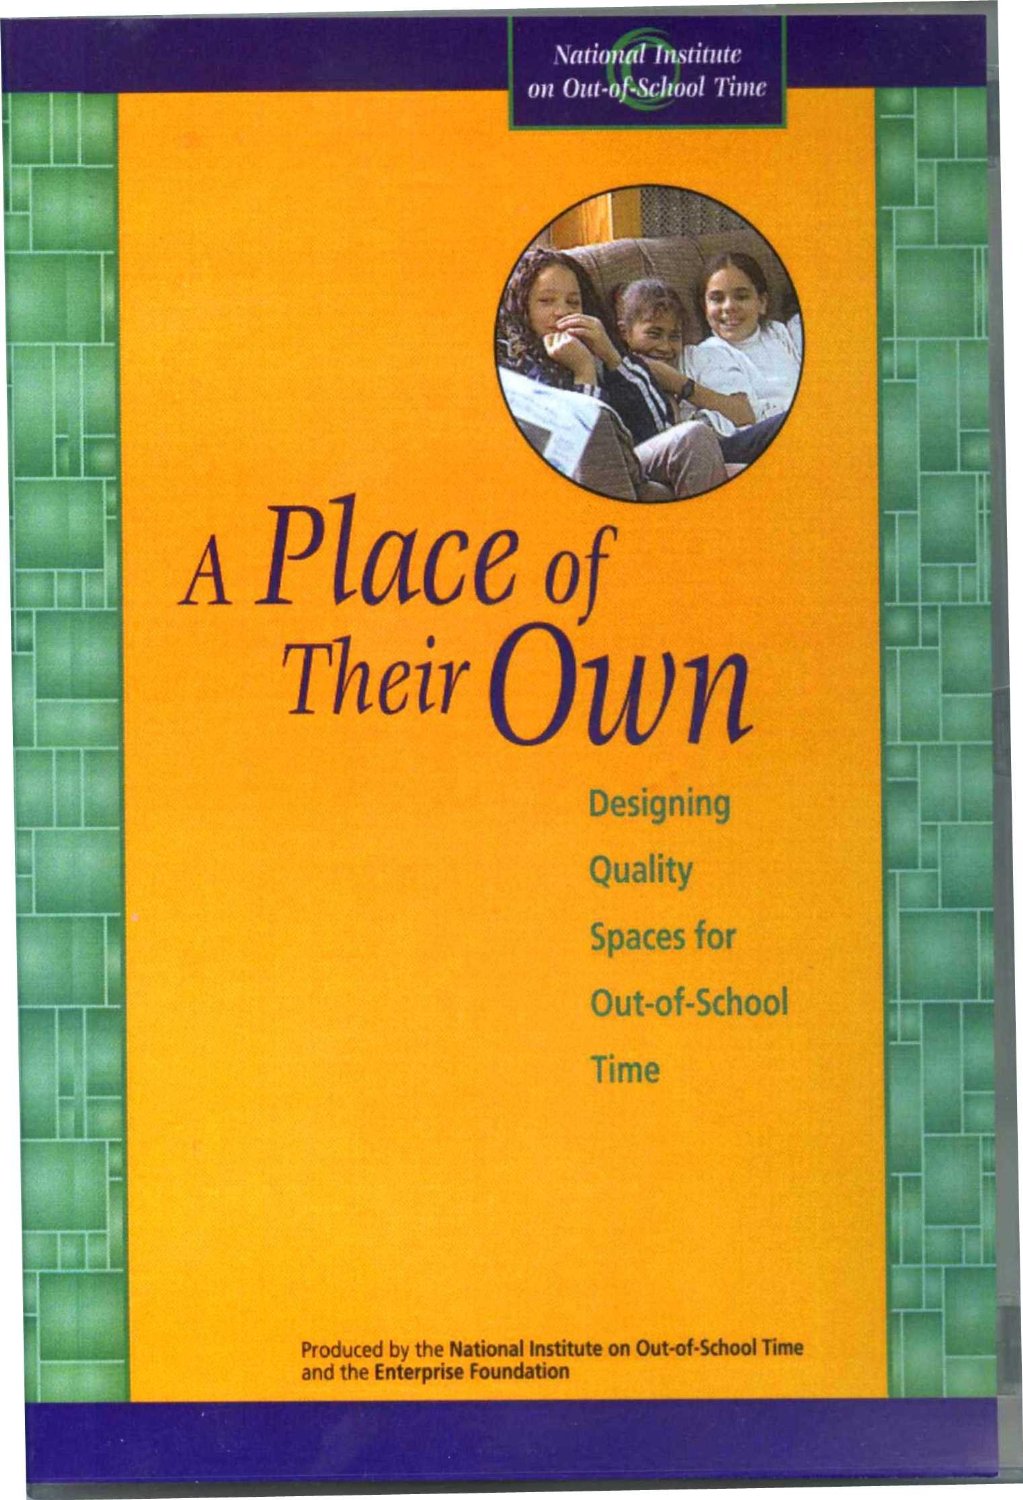 You are currently viewing Designing Quality Spaces for Out-of-School Time